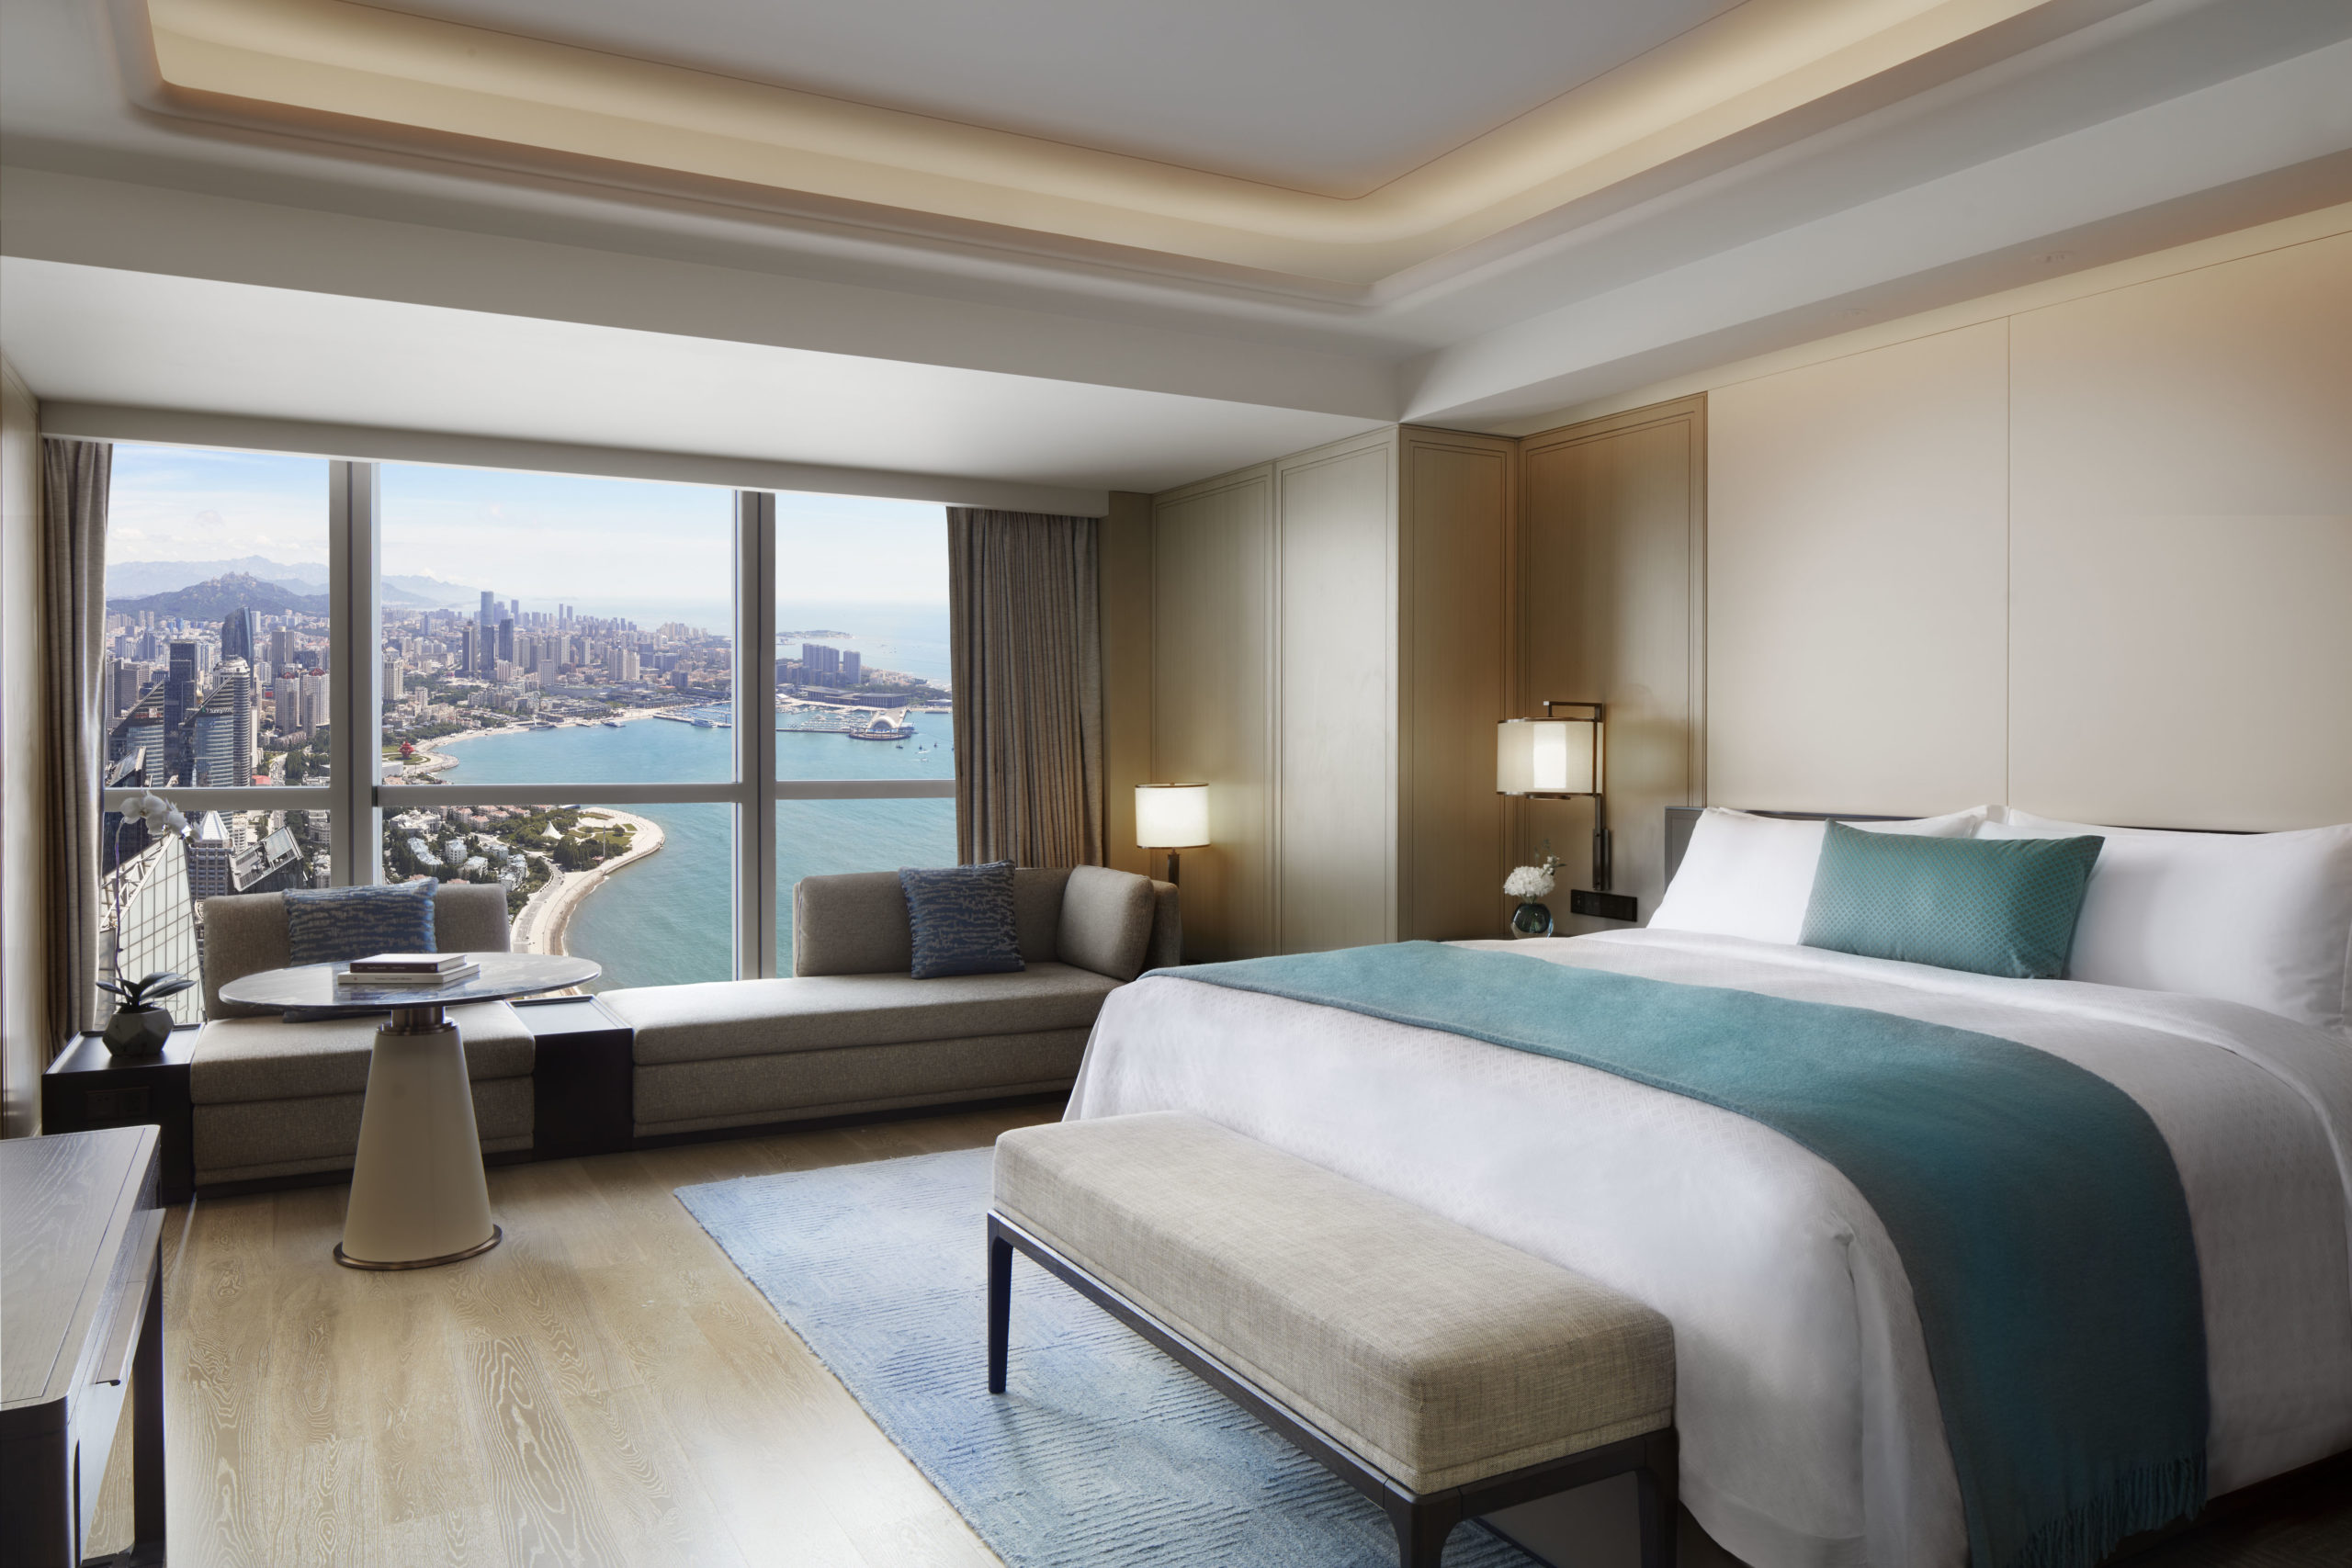 St. Regis Hotels and Resorts has debuted on the Chinese coast with the arrival of the luxurious The St. Regis Qingdao.